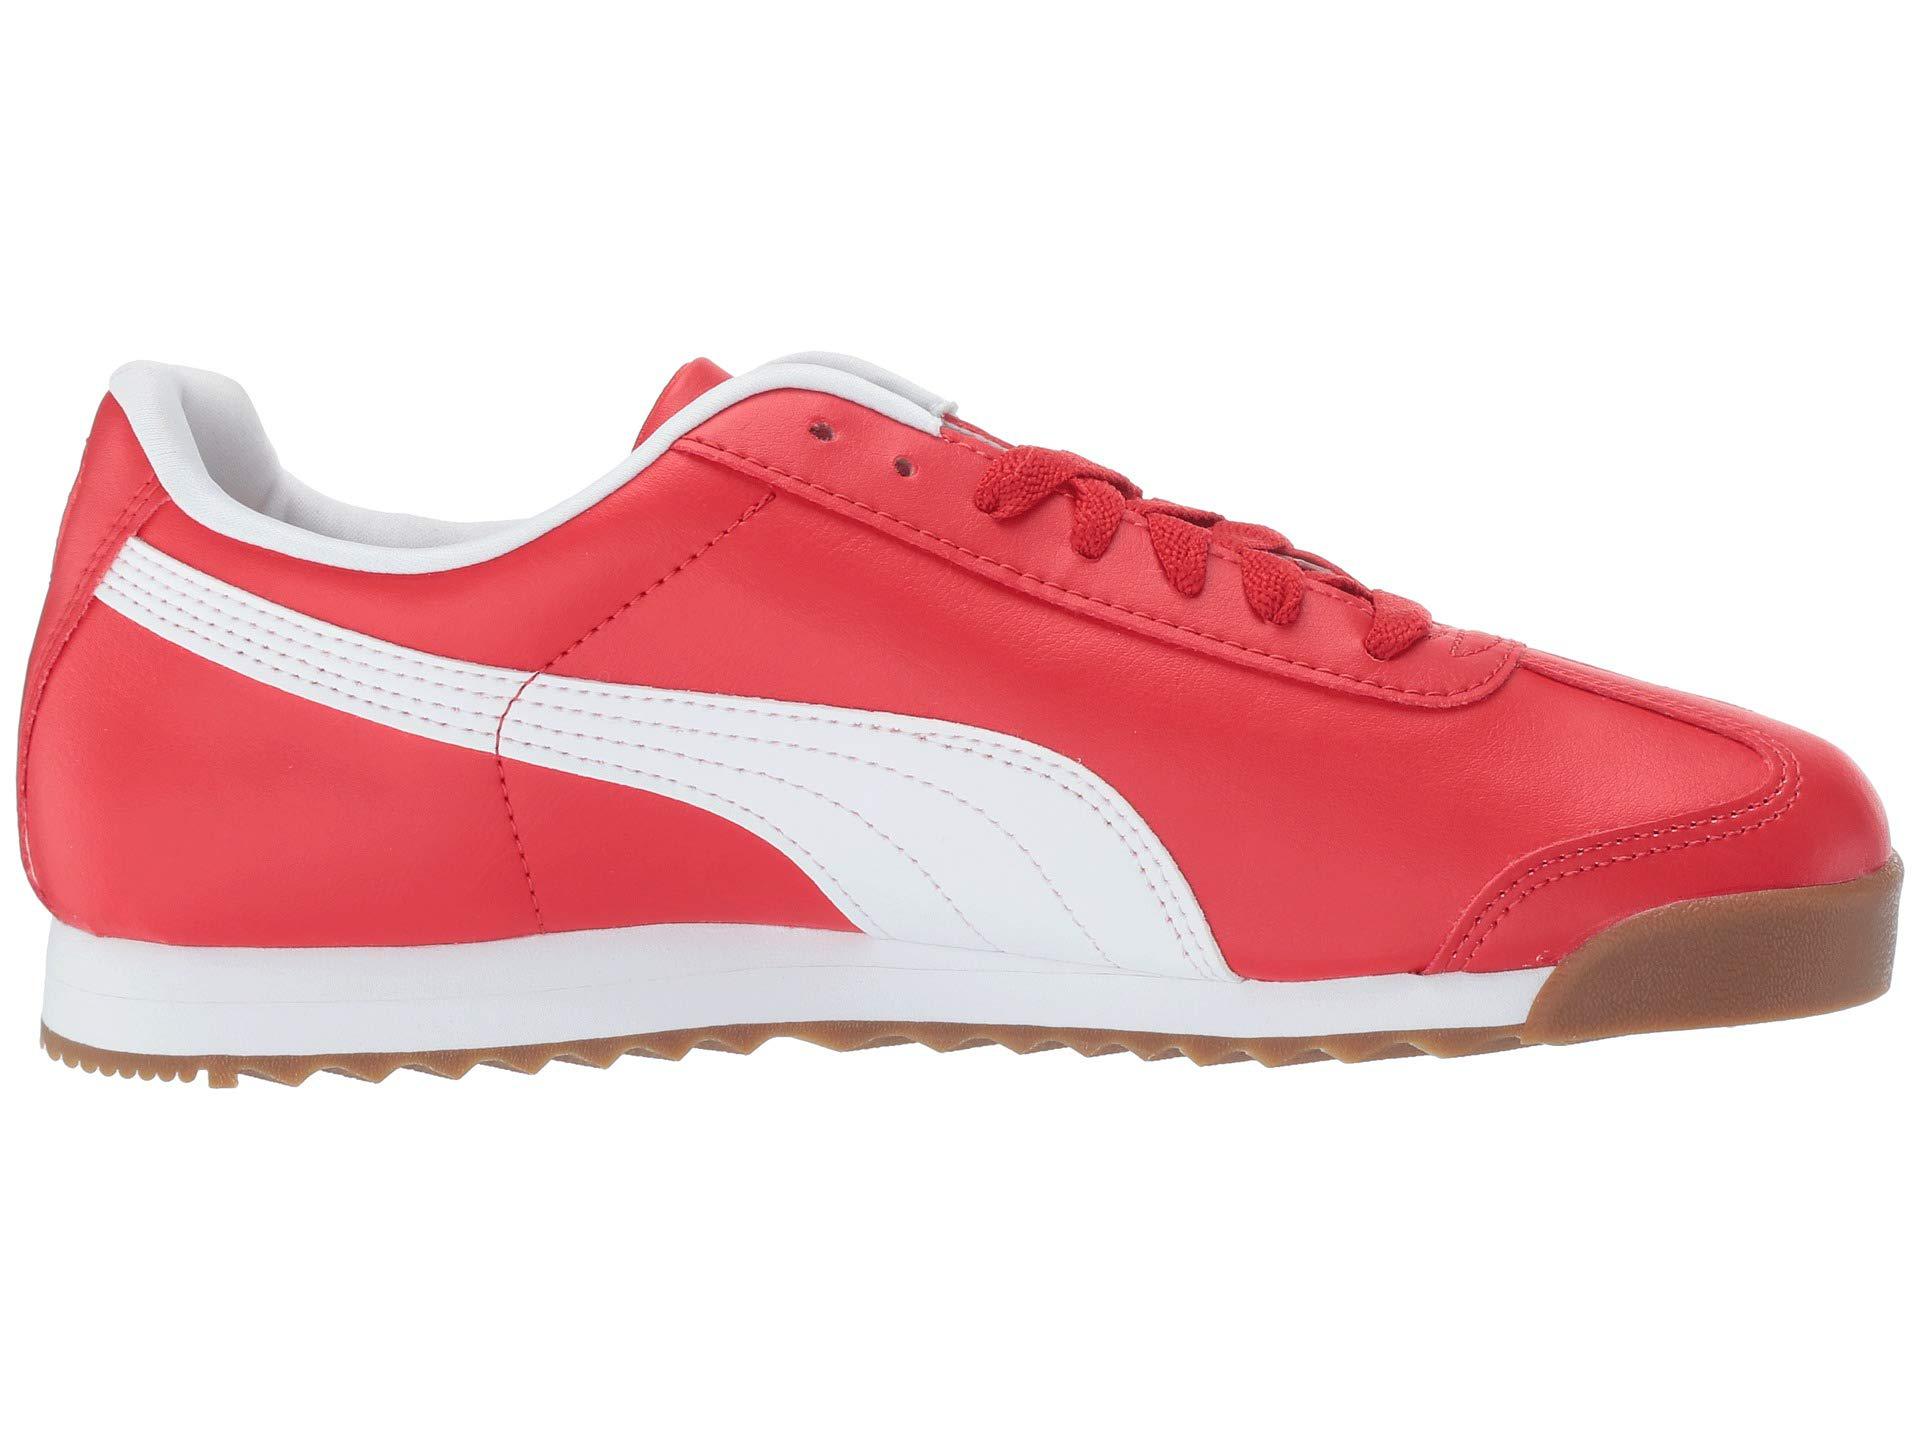 PUMA Roma Basic Sneaker in Red for Men - Save 29% - Lyst